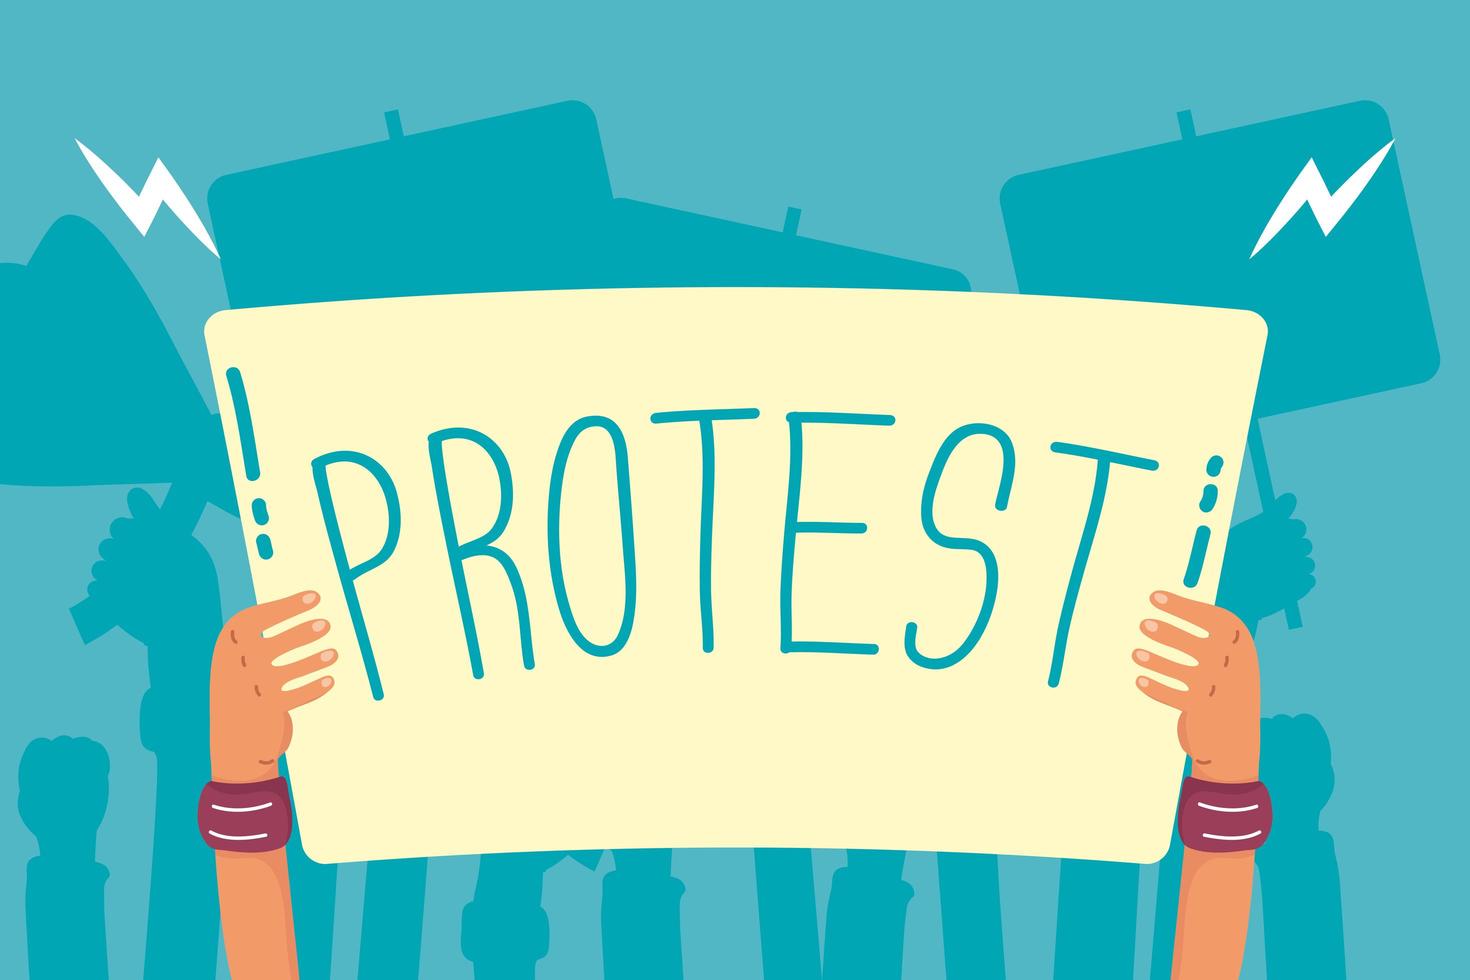 Hands holding a protest banner icon vector